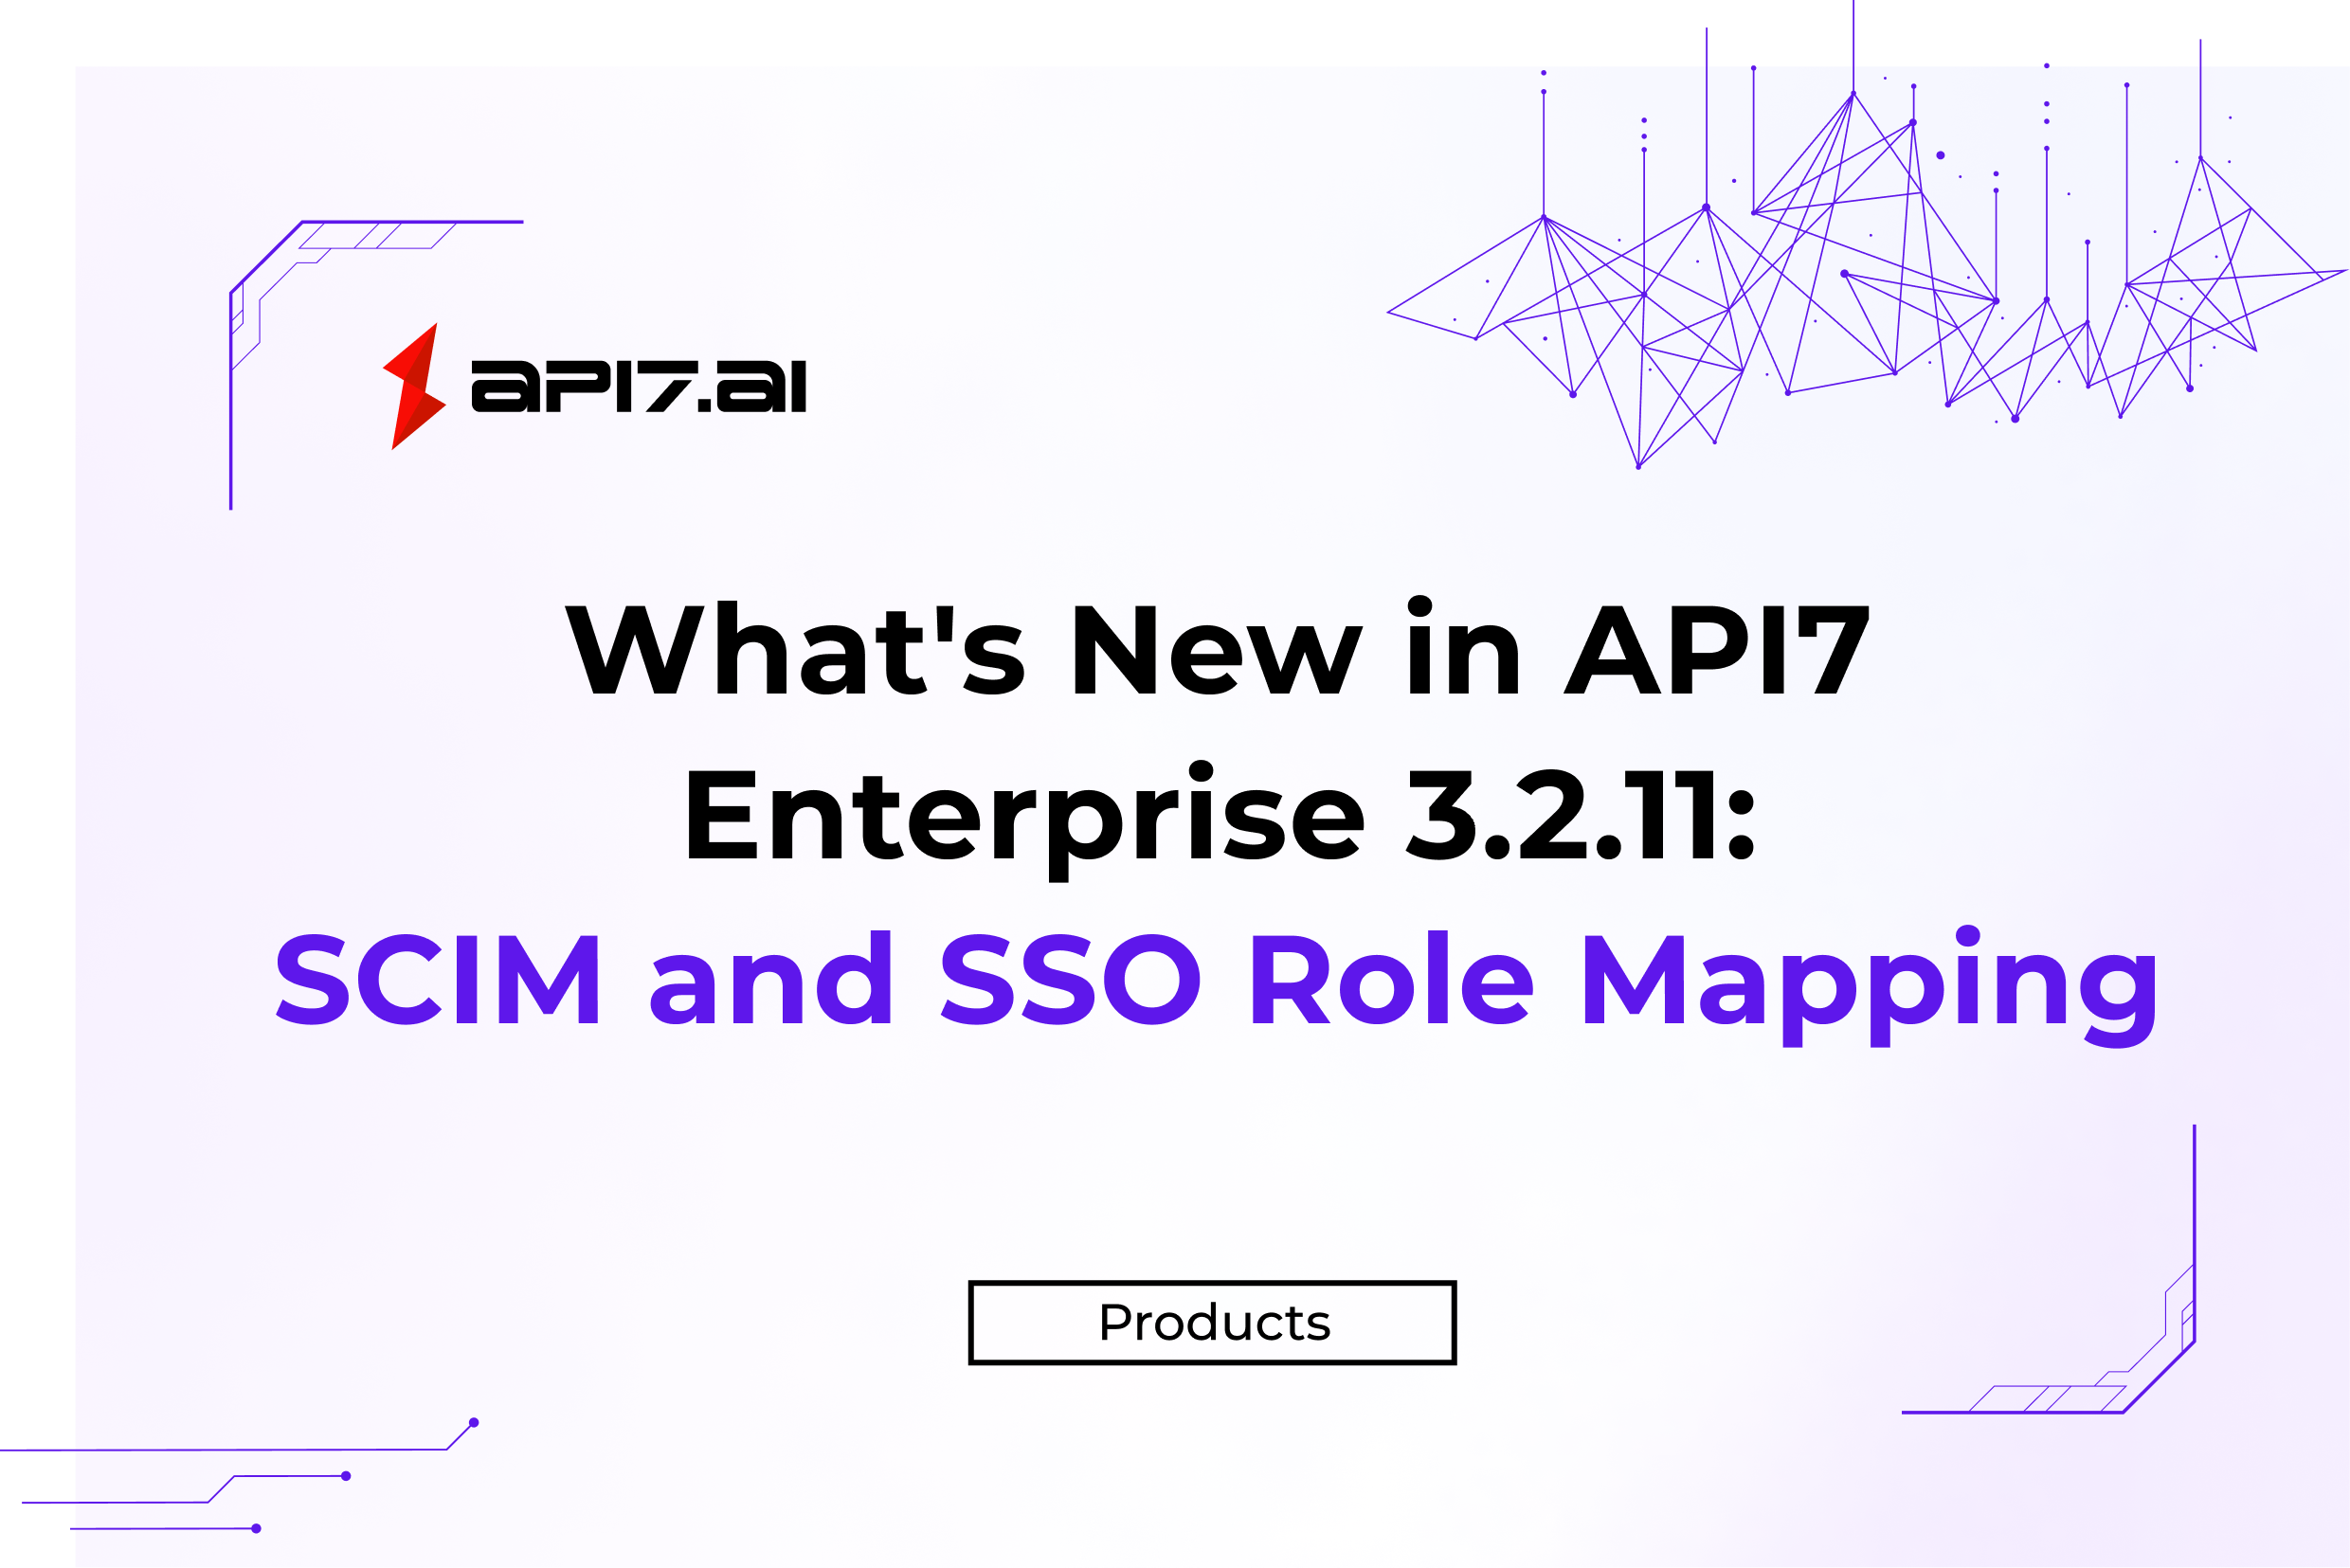 What's New in API7 Enterprise 3.2.11: Supporting SCIM and SSO Role Mapping